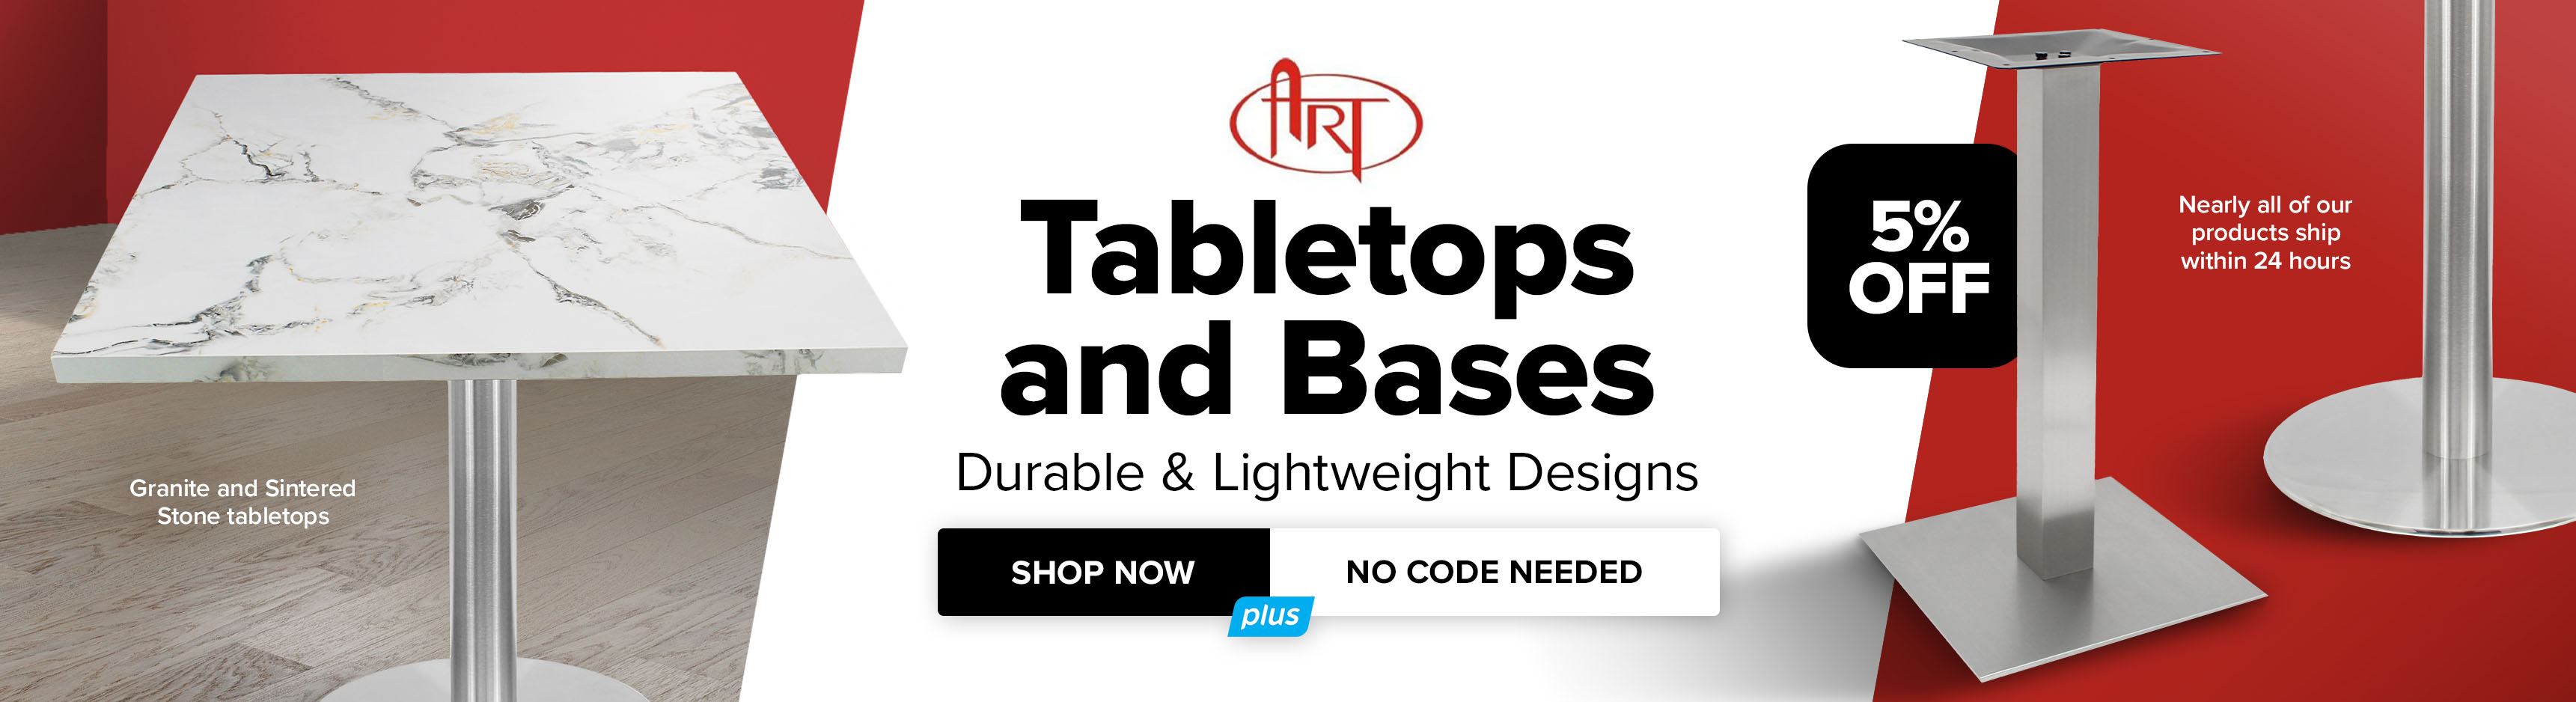 Save 5% on Art Marble tabletops and bases